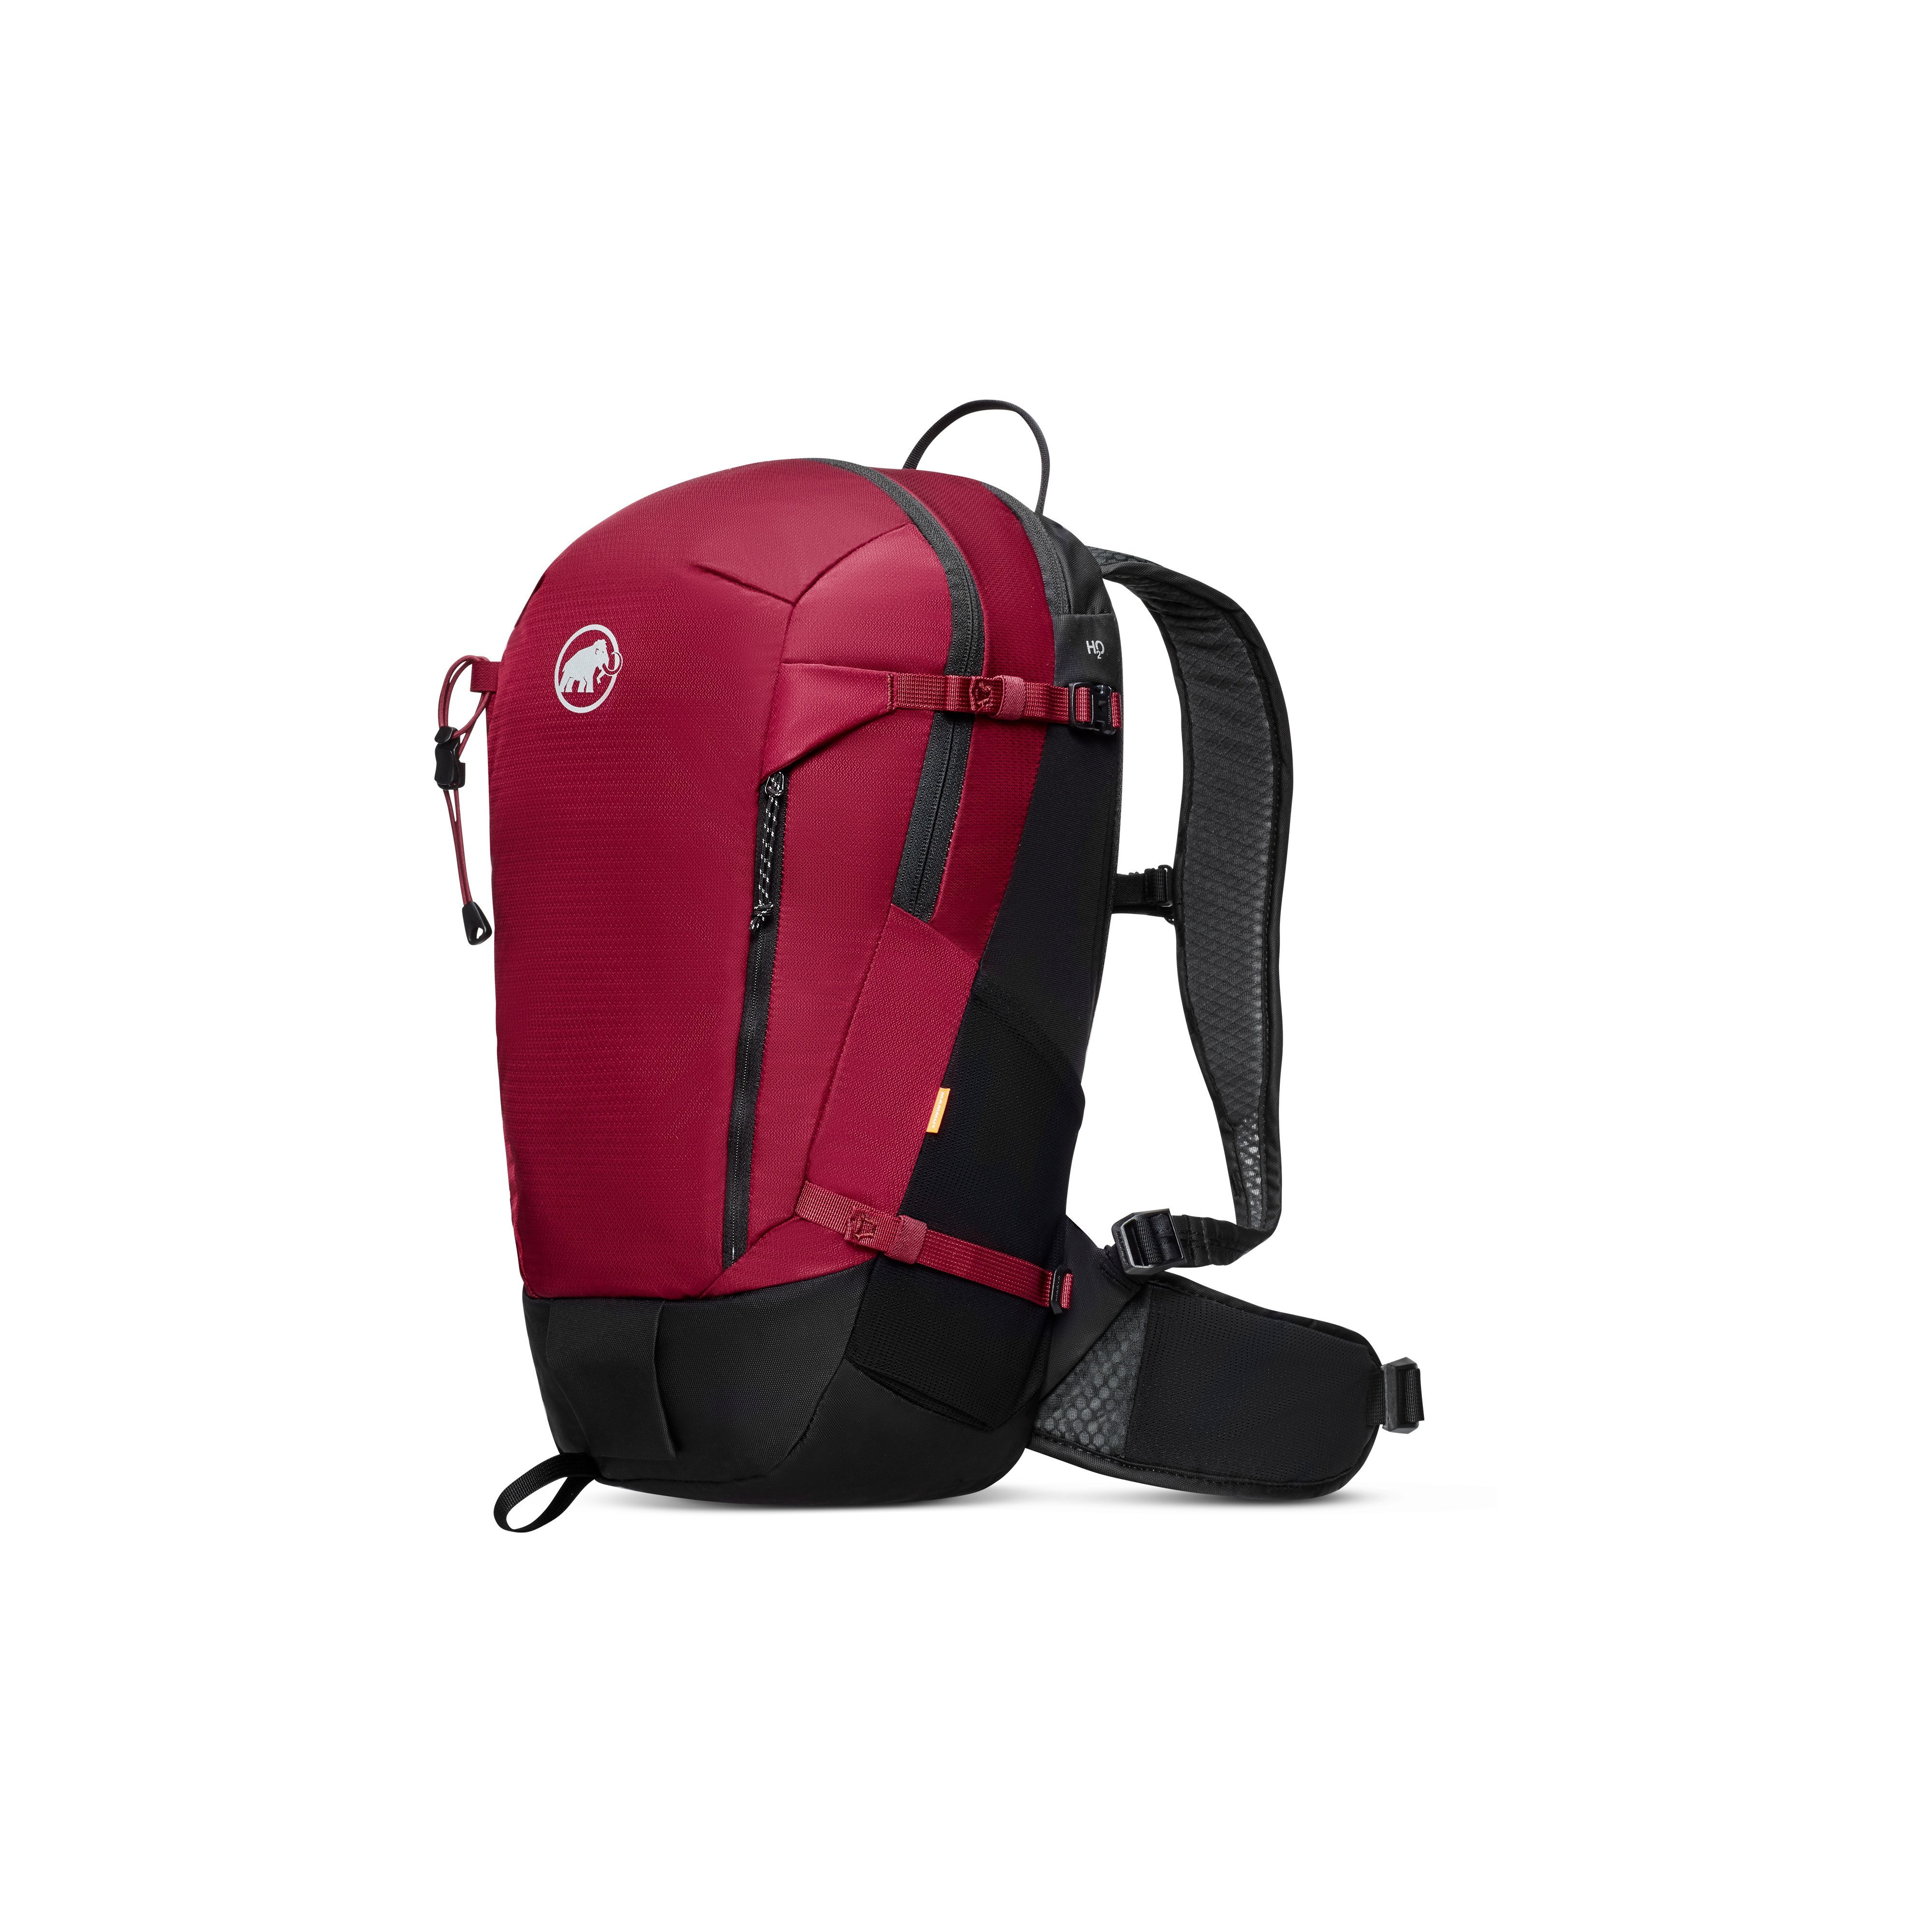 Lithium 20 Women - blood red-black, 20 L product image